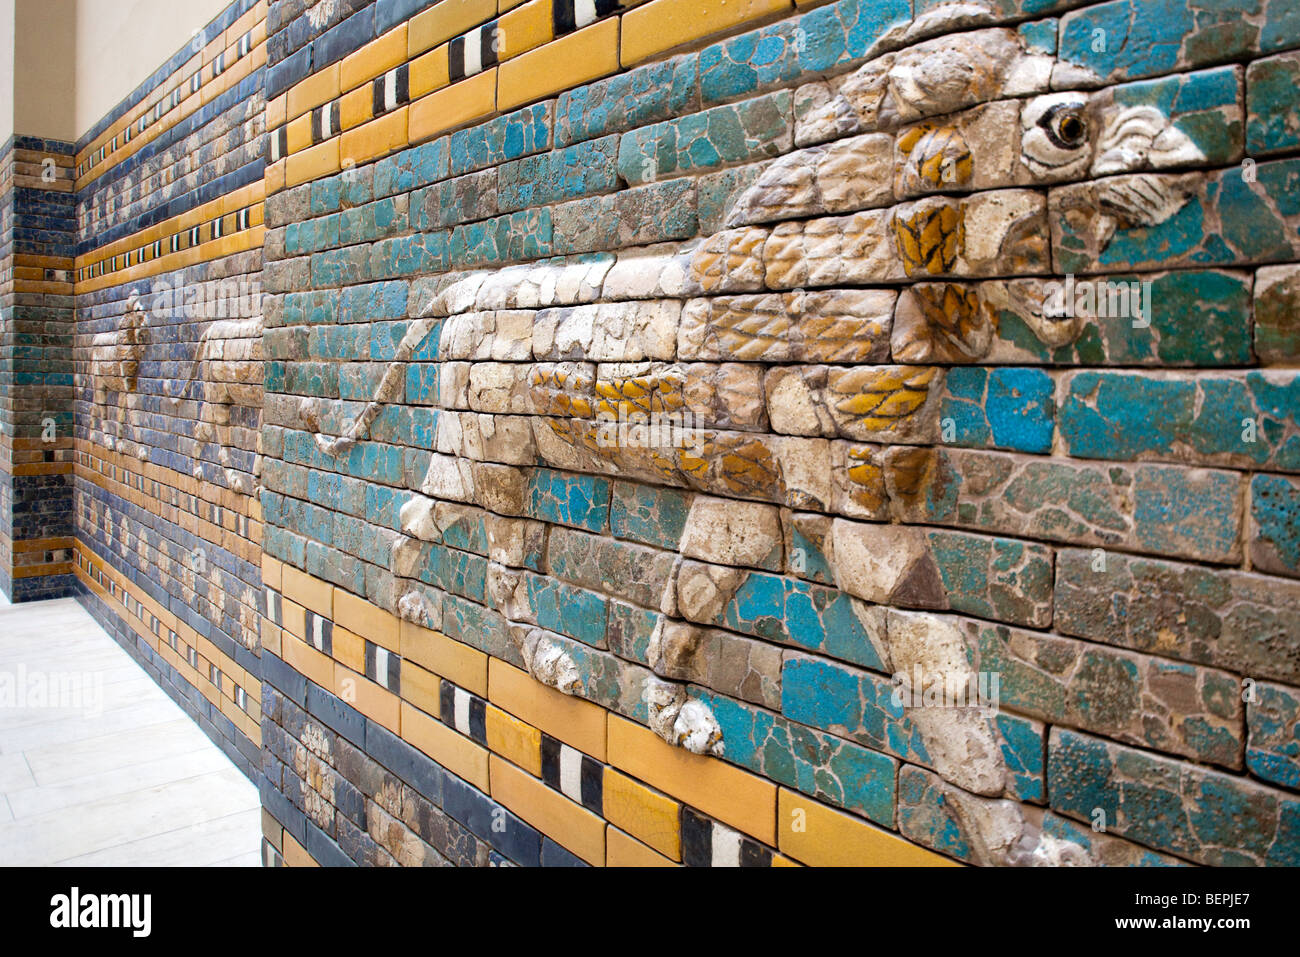 Lions in glazed ceramic from the processional way of Ishtar Gate (Babylon), Pergamon Museum, Berlin, Germany Stock Photo